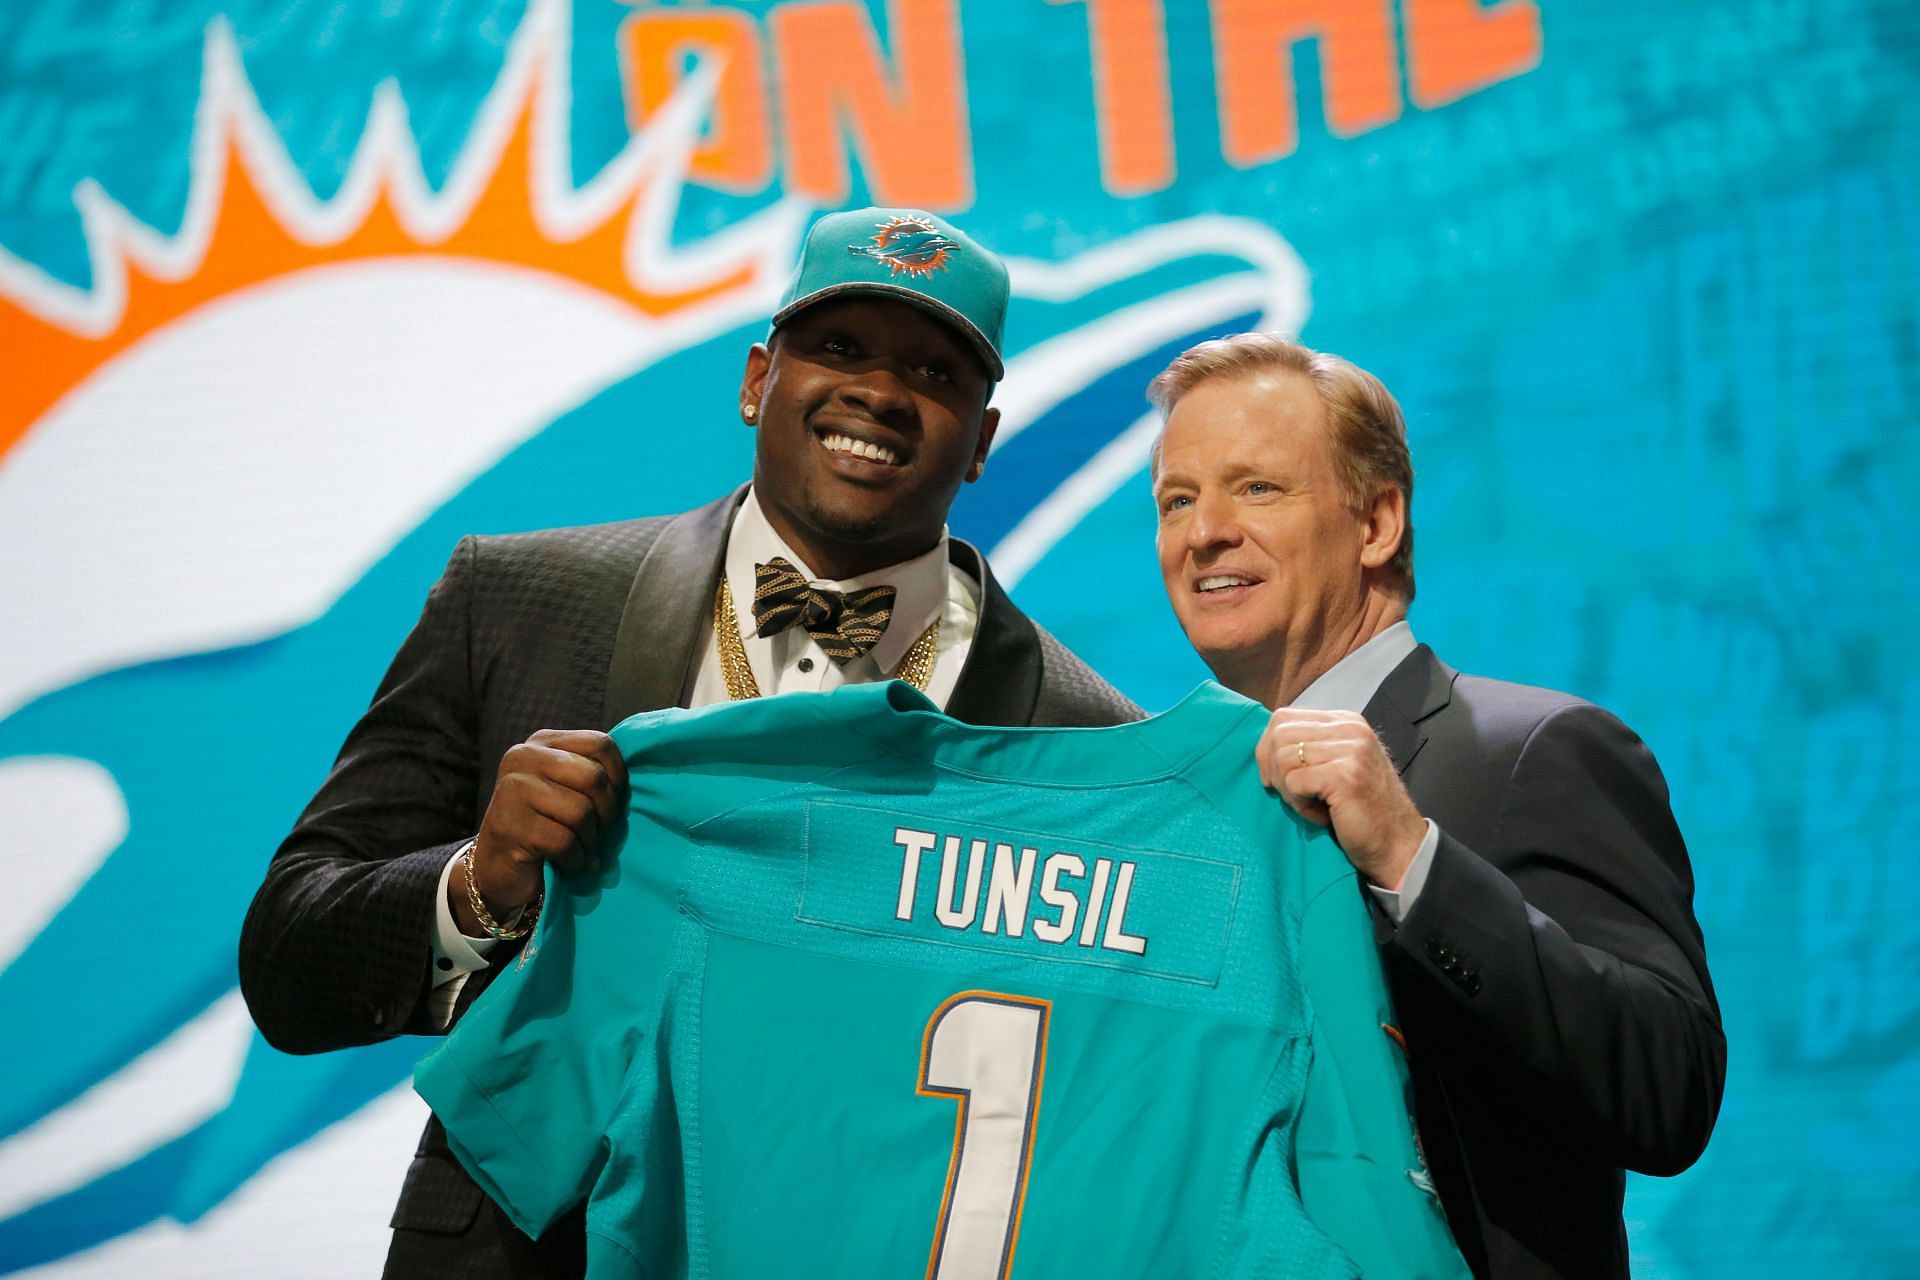 Did a family rivalry spark Tunsil&#039;s slide?